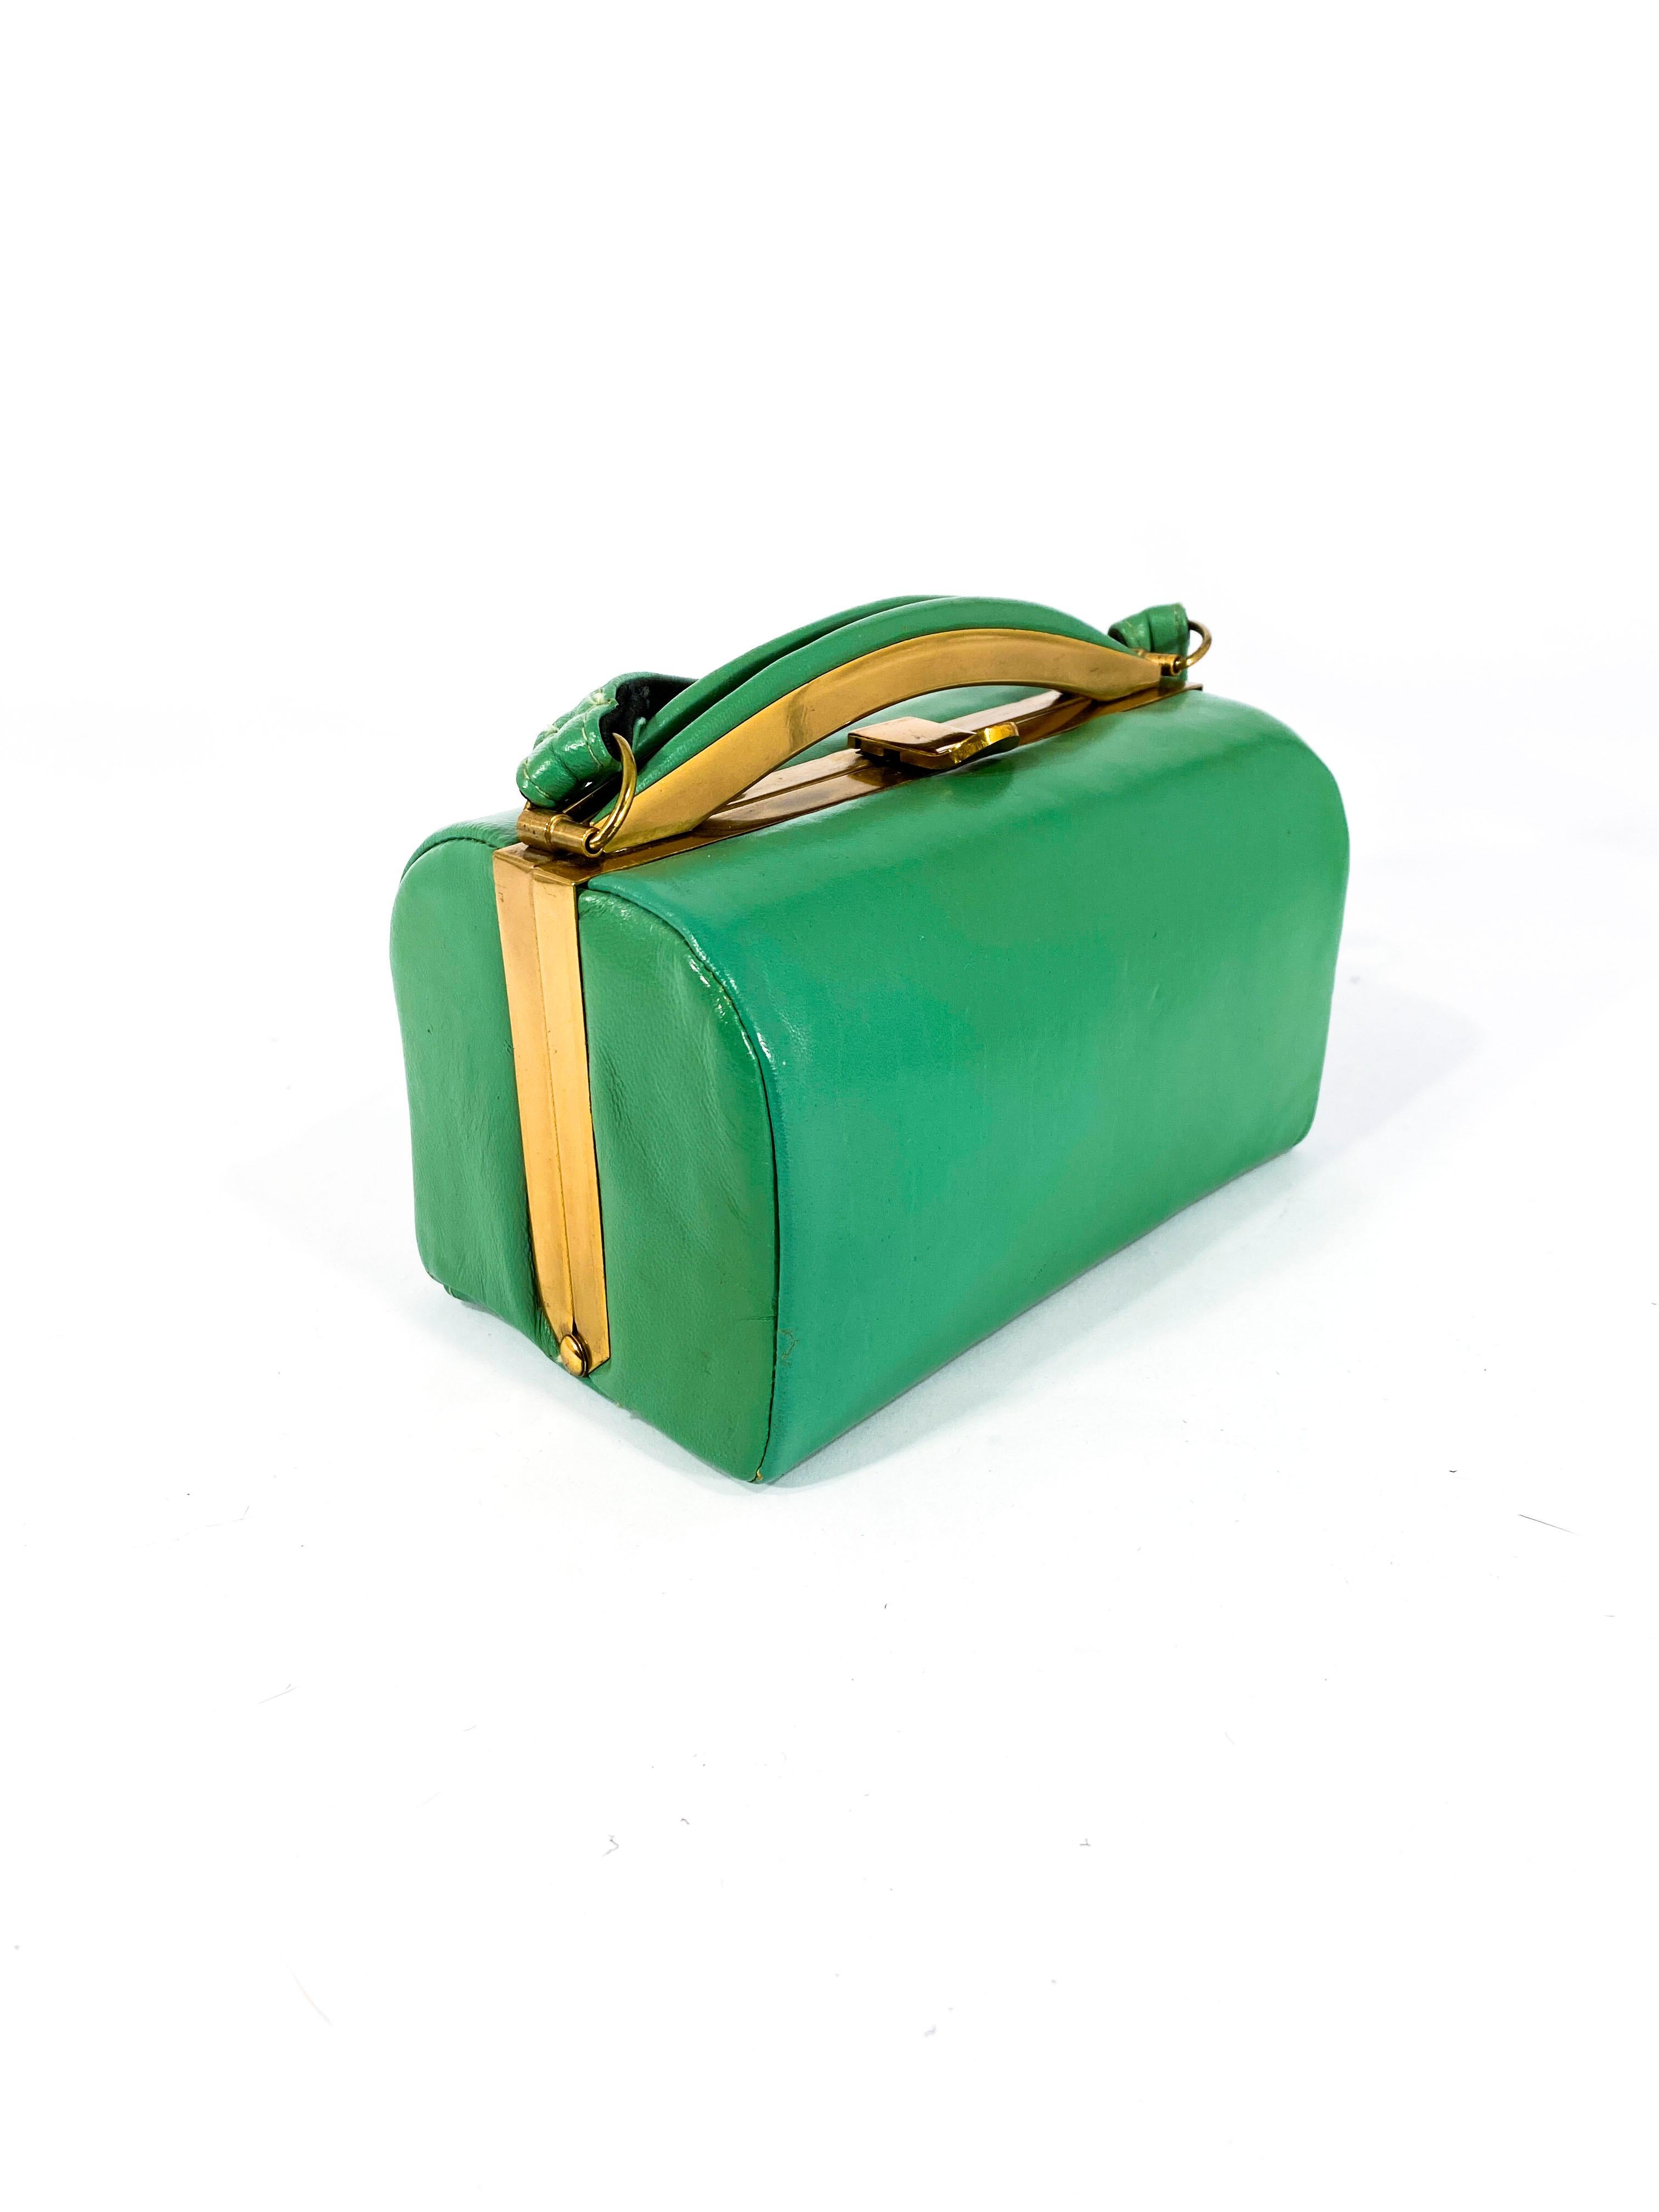 1950s Kelly green leatherette top handle bag with brass frame and hardware. The body of the bag is lined in black twill and has a centered metal zipper pocket. 